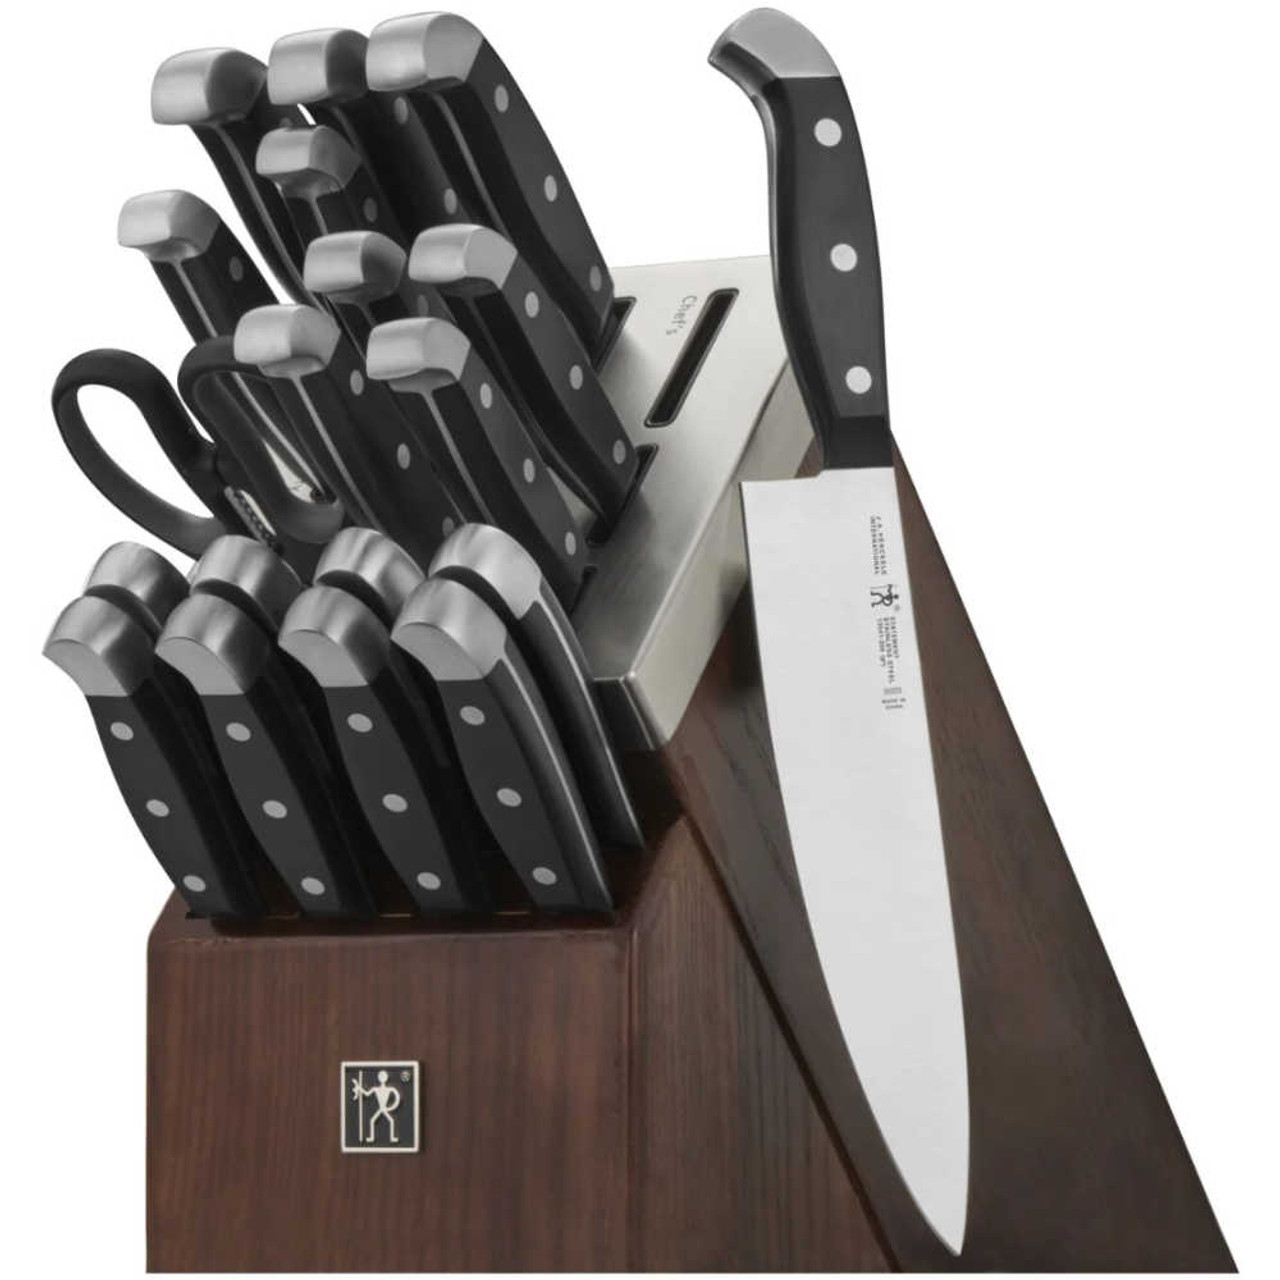 https://cdn11.bigcommerce.com/s-hccytny0od/images/stencil/1280x1280/products/5178/22368/Henckels_Statement_20-Piece_Self-Sharpening_Knife_Block_Set__81417.1668891953.jpg?c=2?imbypass=on